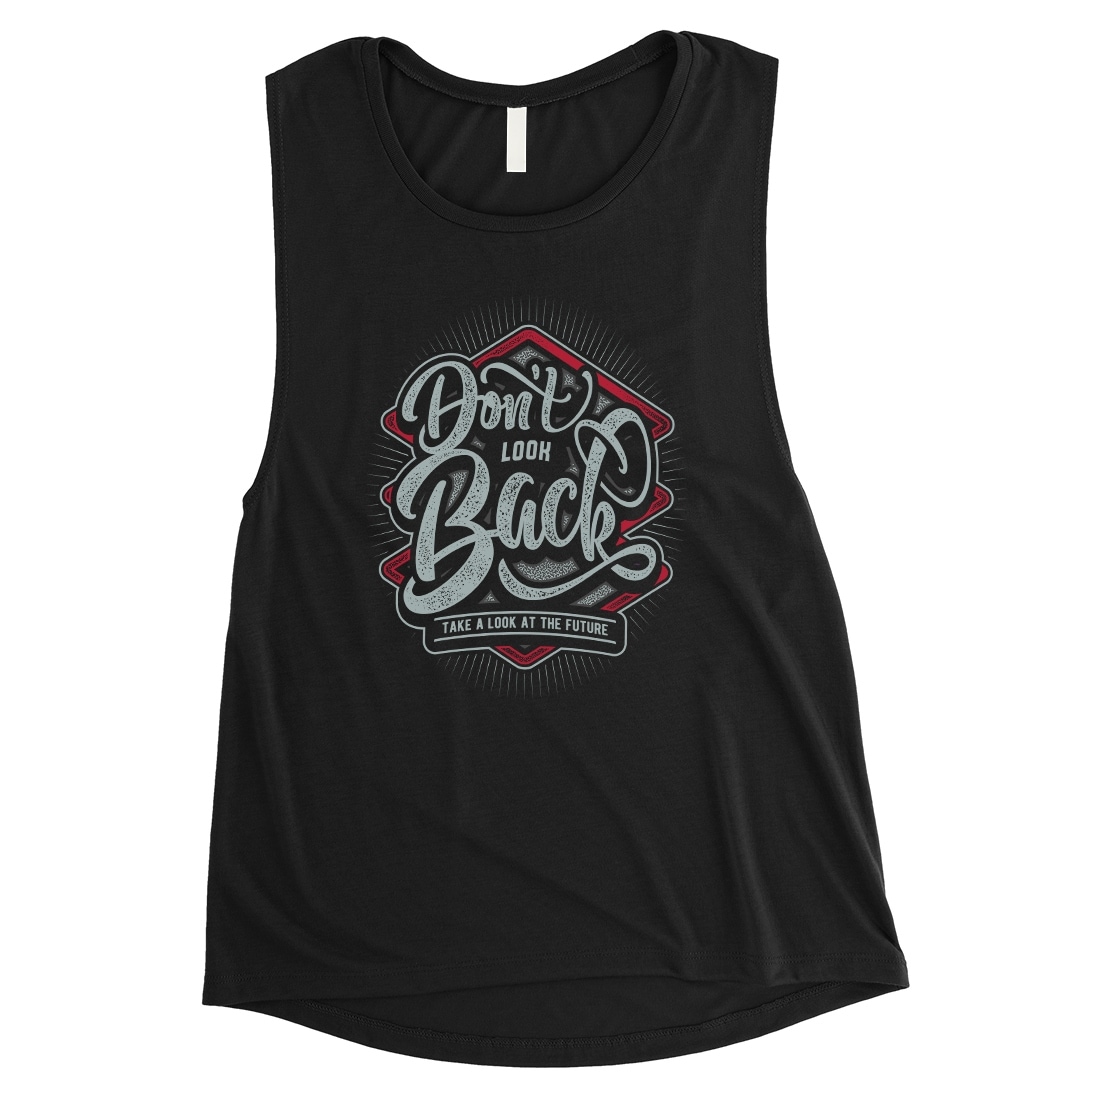 Don't Look Back Womens Black Muscle Shirt